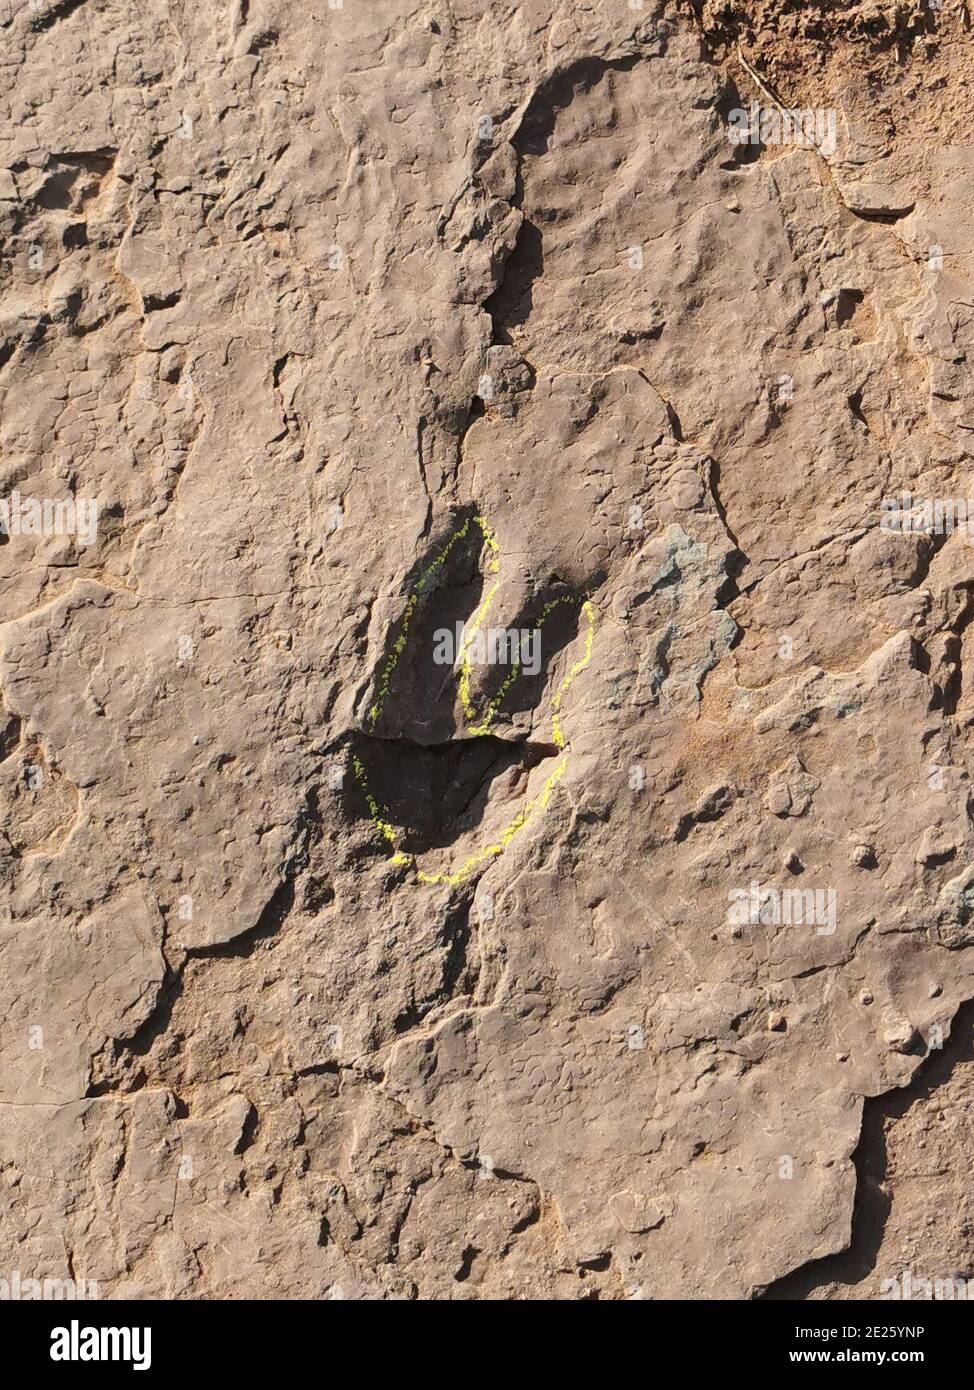 (210112) -- FUZHOU, Jan. 12, 2021 (Xinhua) -- A dinosaur footprint is seen at Longxiang Village, Lincheng Township, Shanghang County, southeast China's Fujian Province, Nov. 9, 2020. A team of Chinese paleontologists has identified more than 240 fossilized dinosaur footprints in east China's Fujian, the first traces of dinosaur activity found in the province. The dinosaur track site in Shanghang County, covering an area of about 1,600 square meters, is the largest and the most diverse such site discovered in China dating back to the Upper Cretaceous period, according to scientists. The Stock Photo